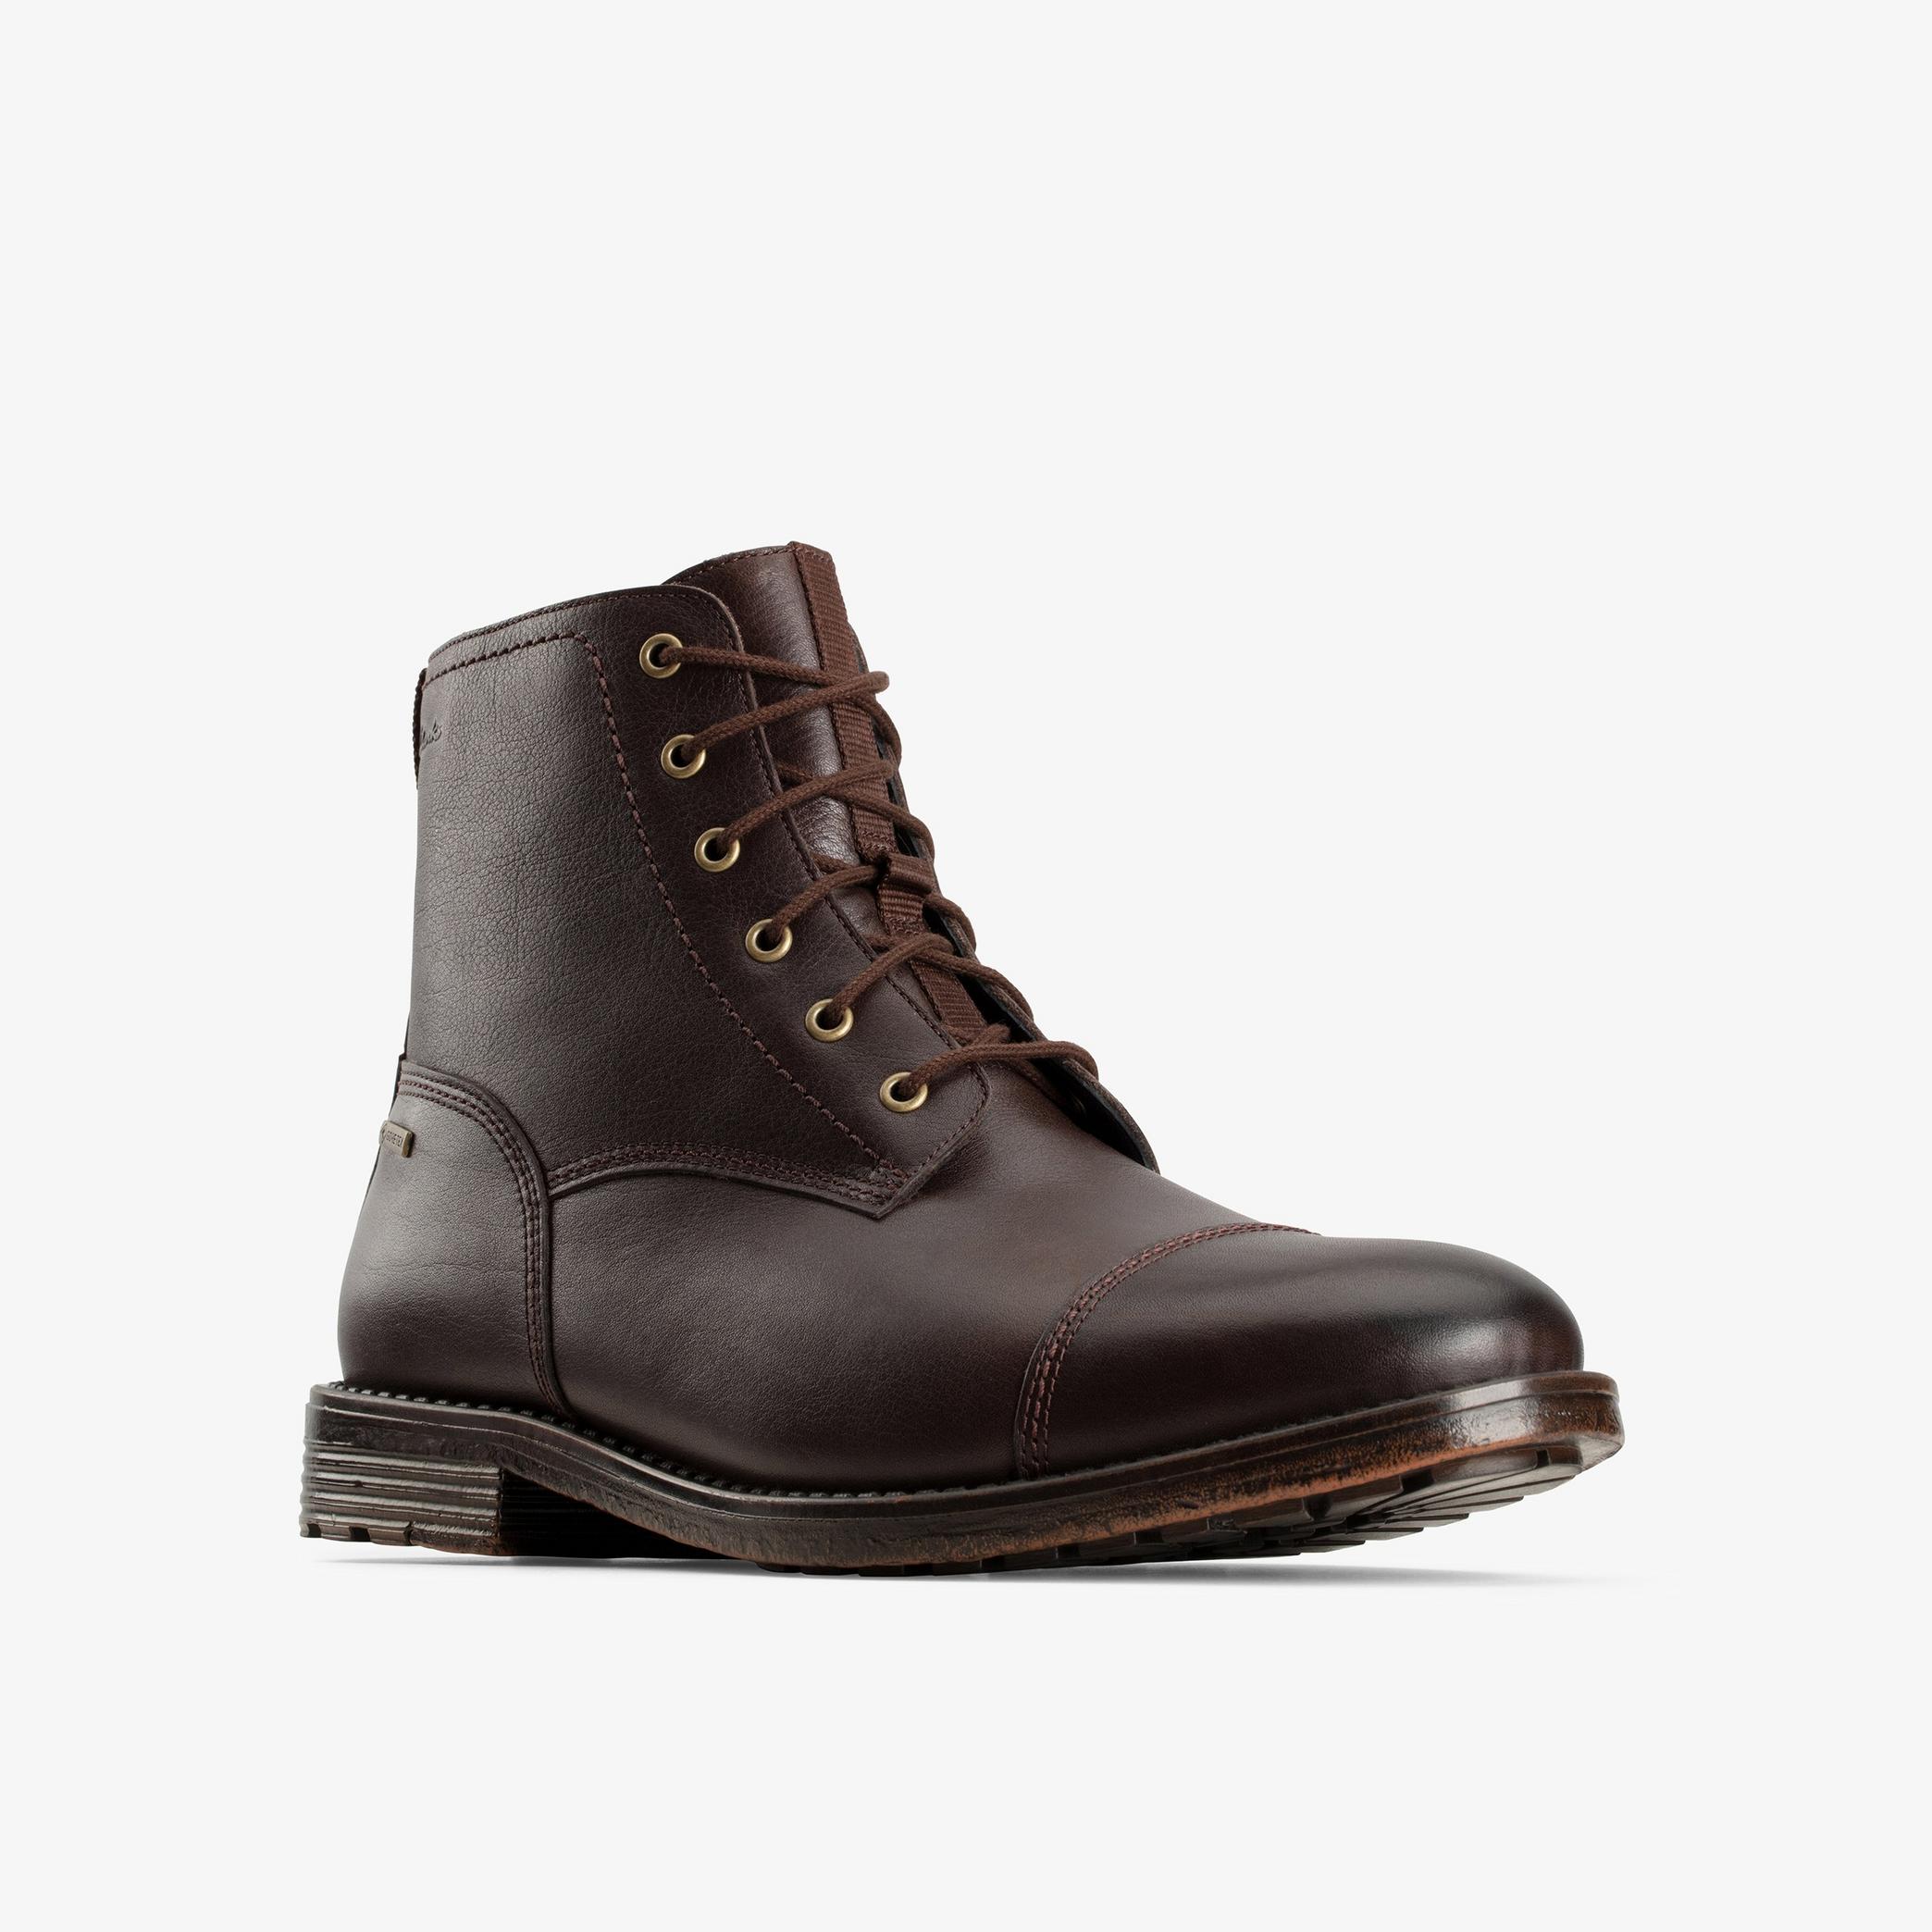 Foxwell Hi GTX Brown Warmlined Leather Ankle Boots, view 3 of 6